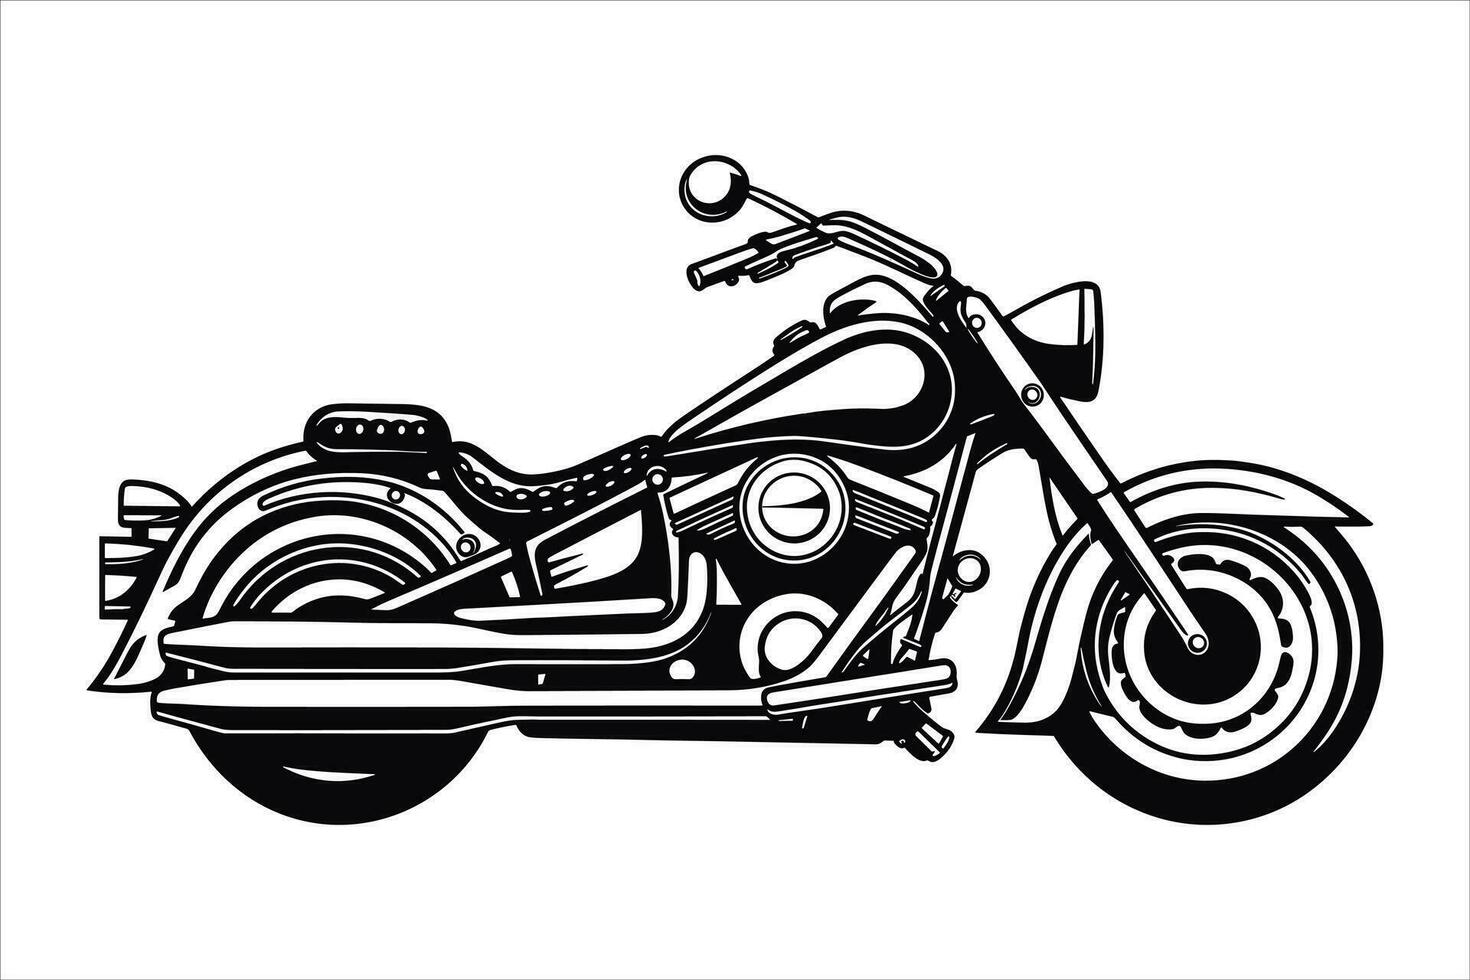 Motorcycle and superbike vector